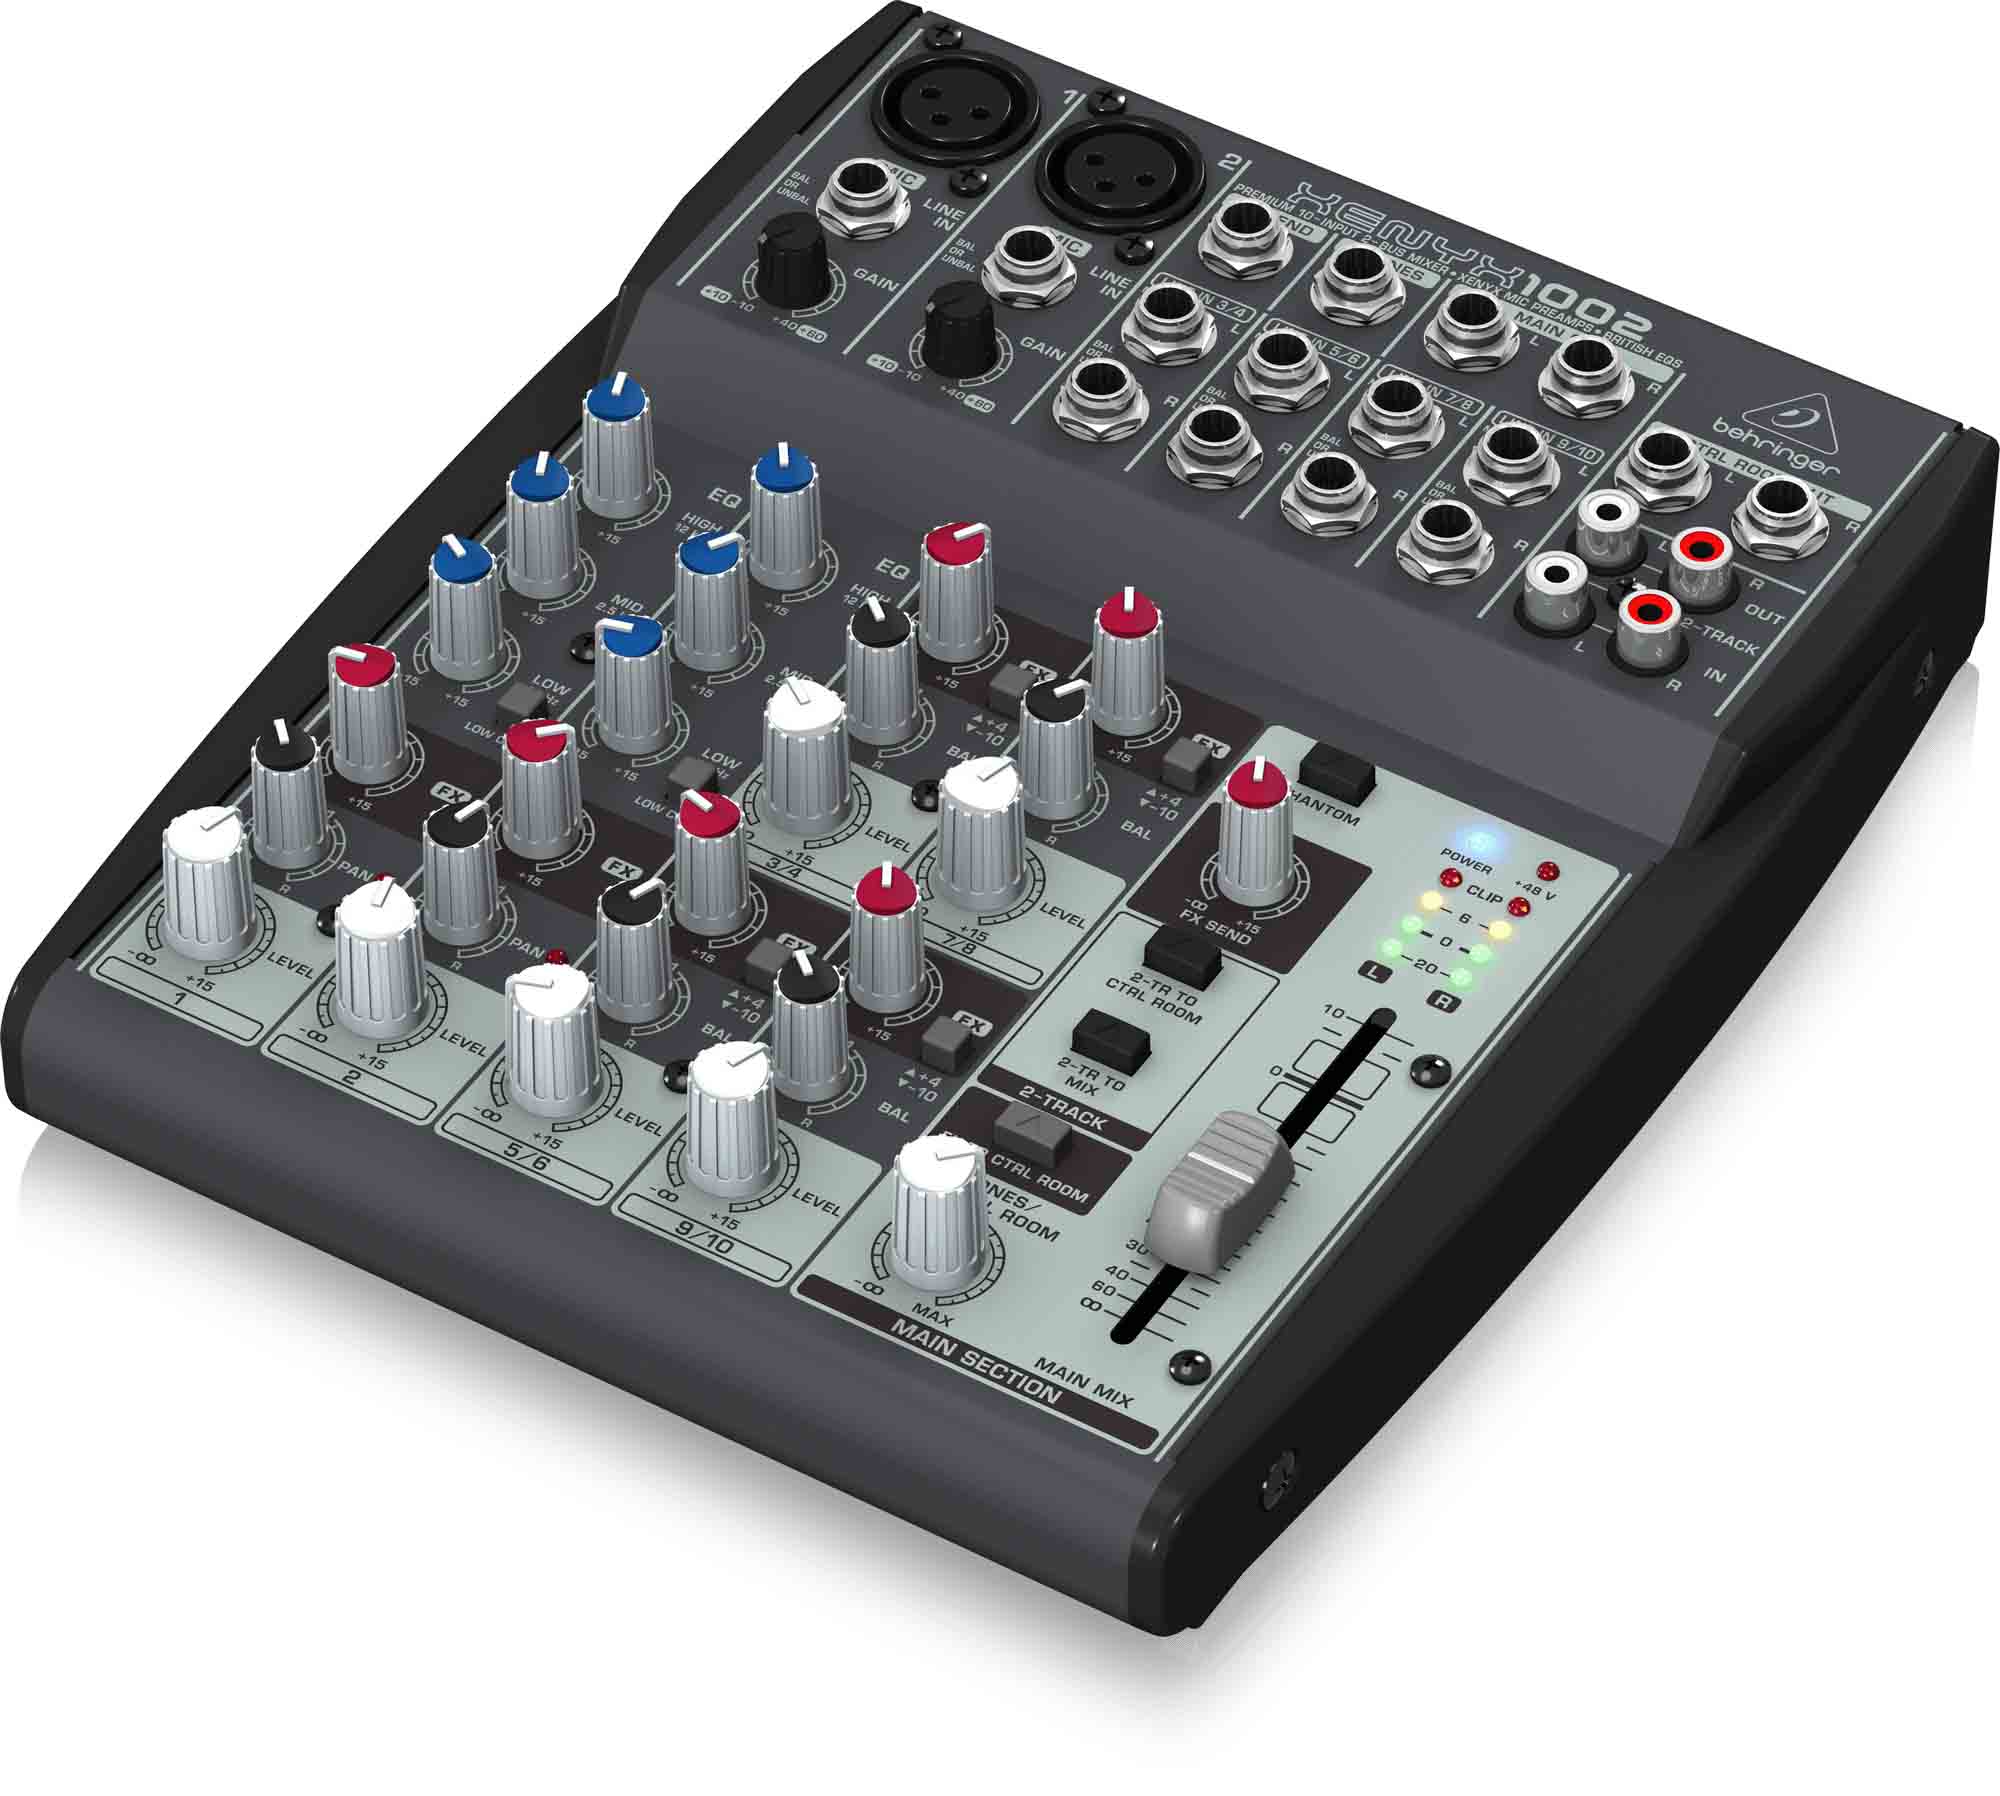 Behringer 1002 Premium 10-Input 2-Bus Mixer with XENYX Mic Preamps and British EQs - Hollywood DJ